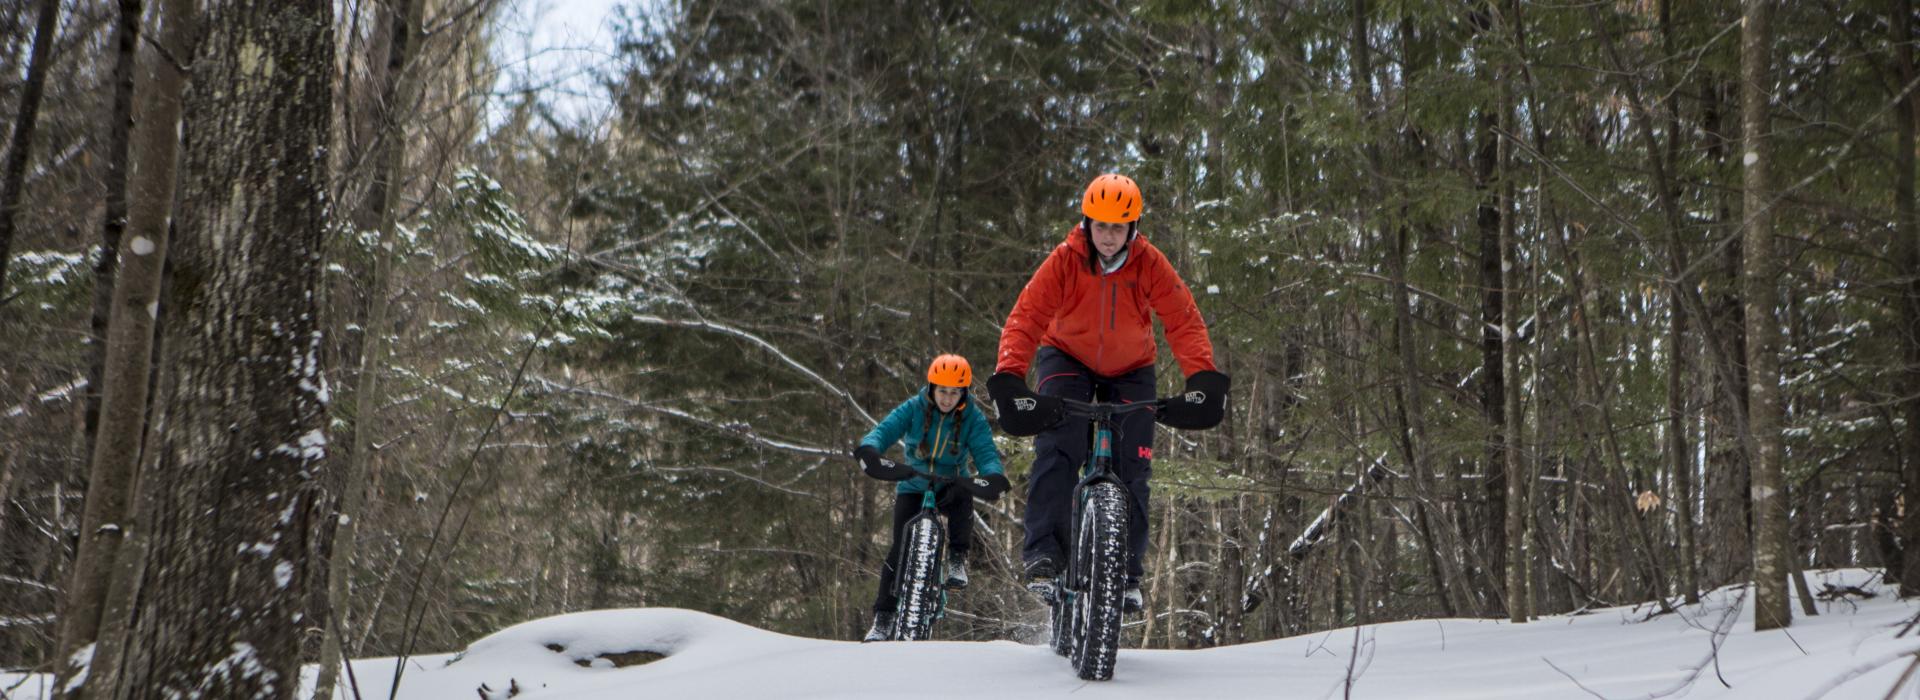 The winter mountain biking is fine and has many levels of difficulty.